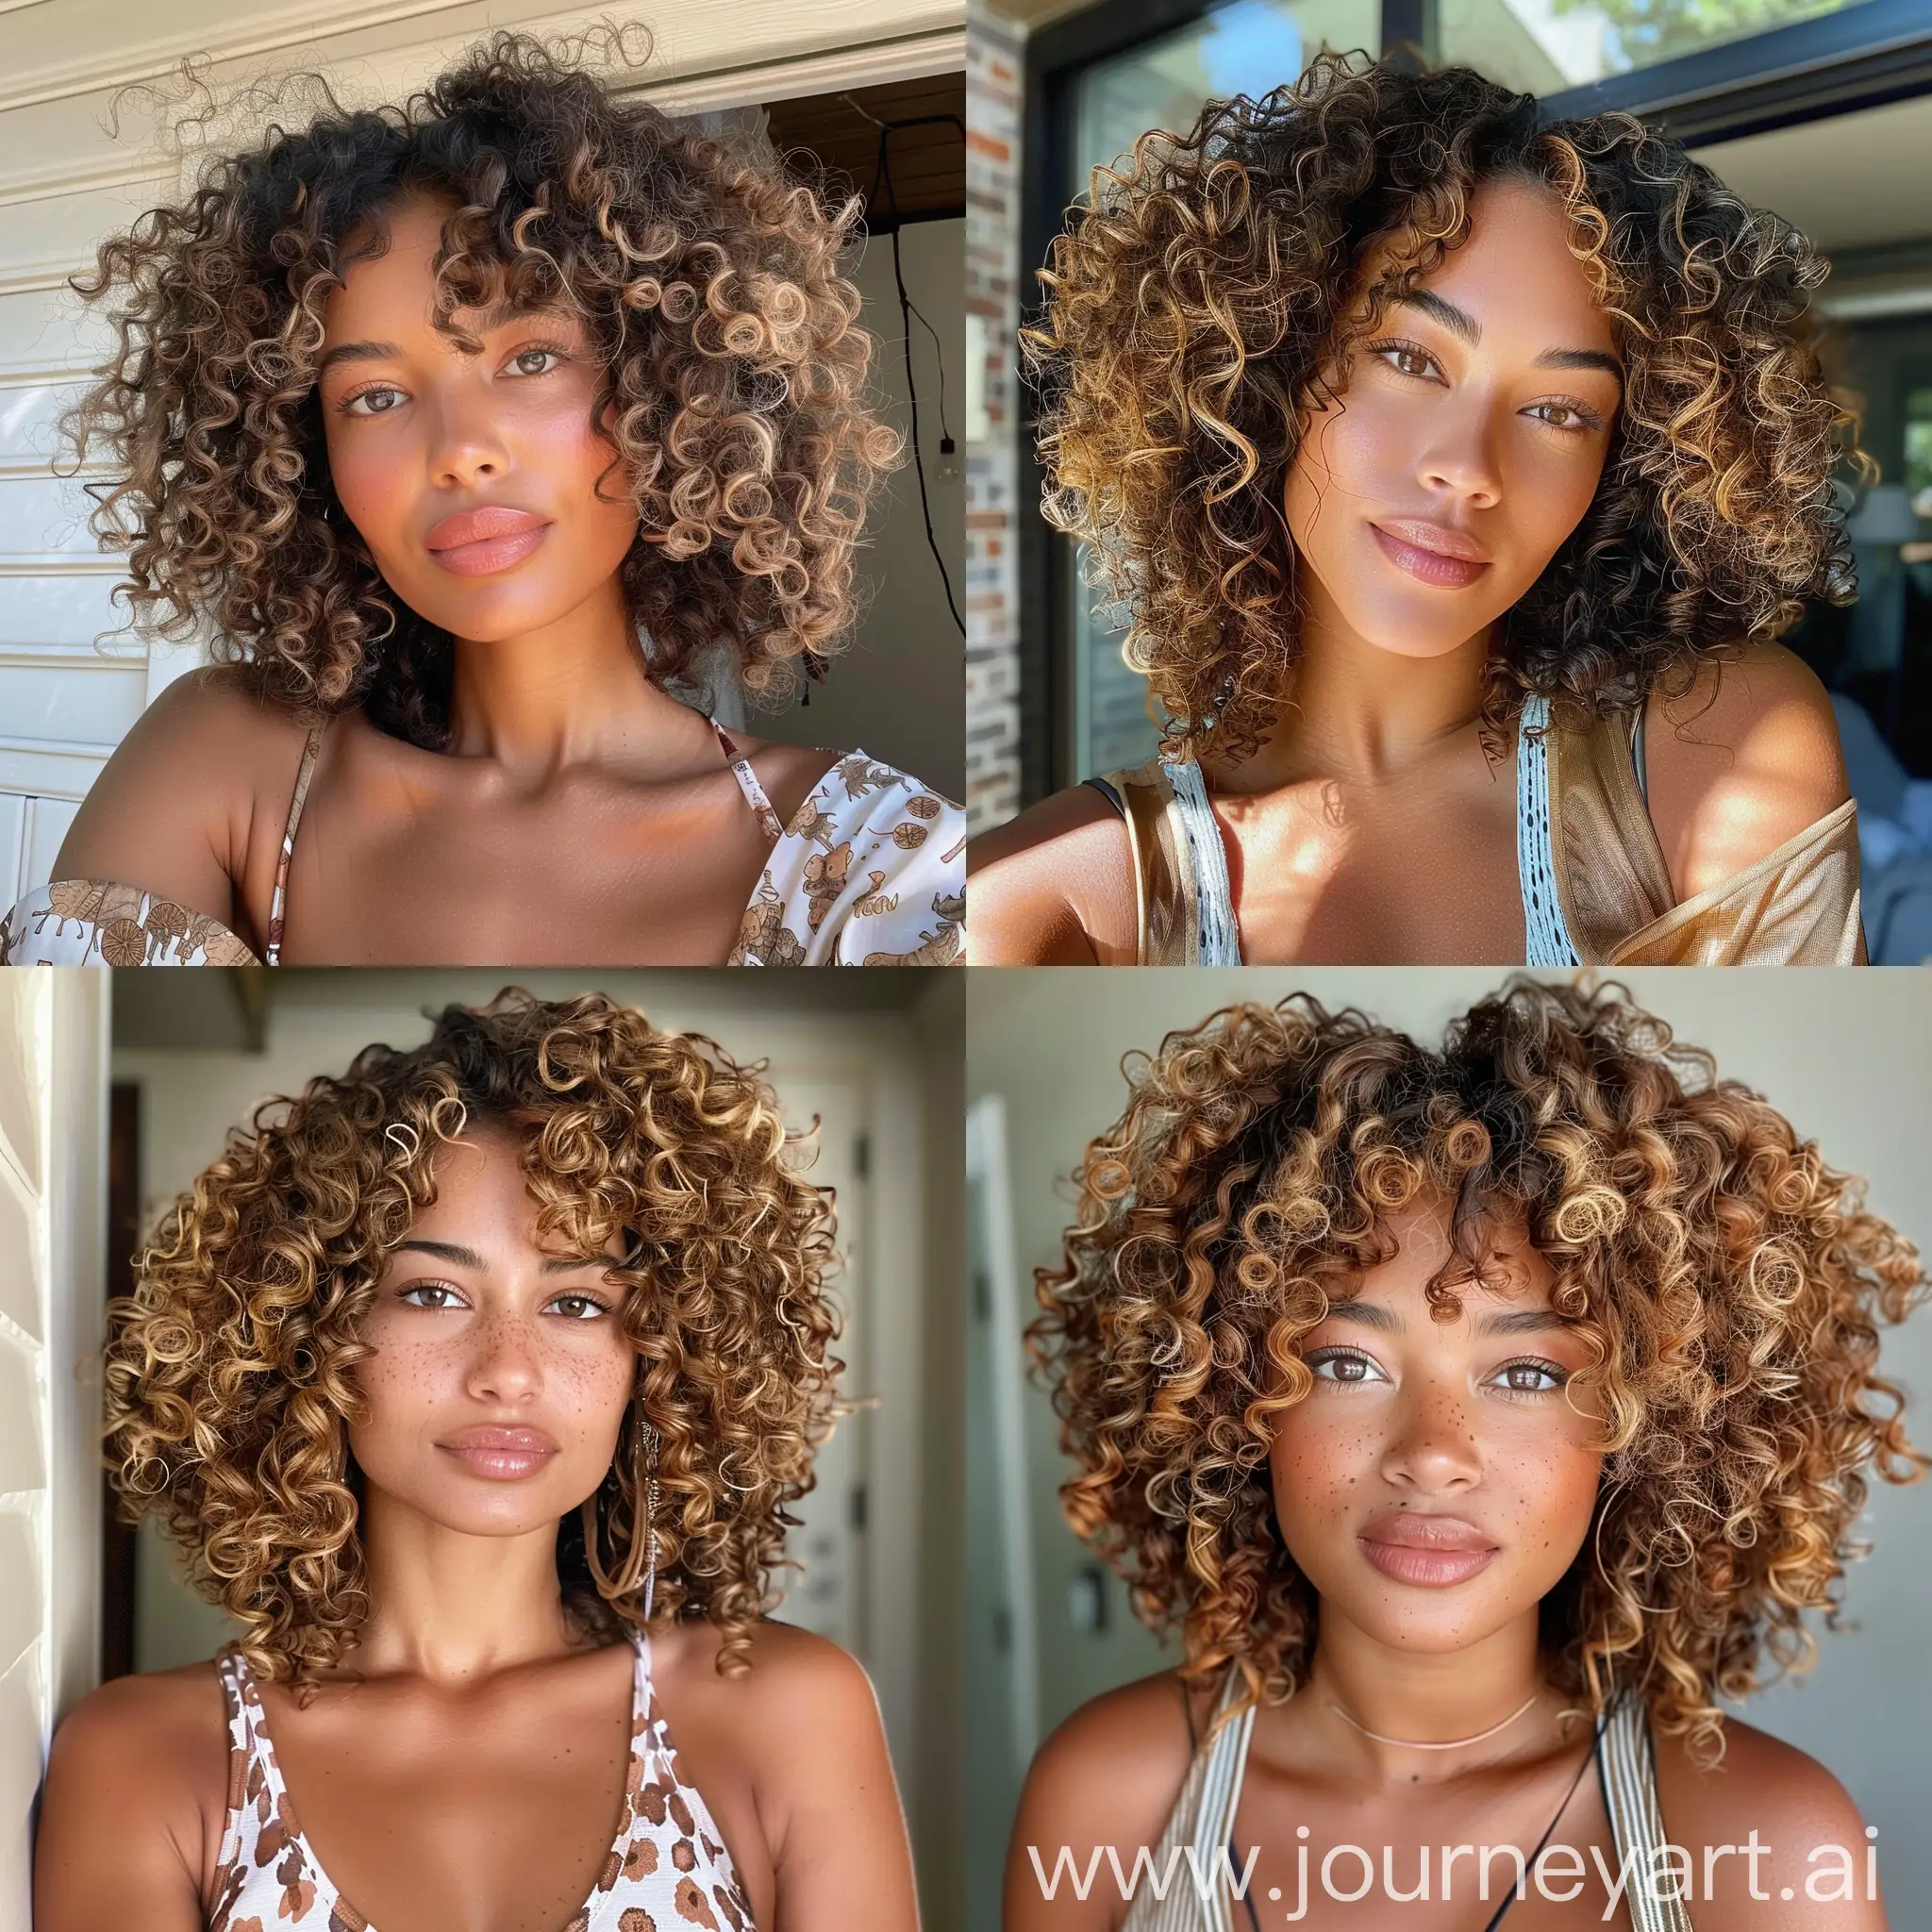 A woman with tan skin with curly hair wearing casual clothes with a background